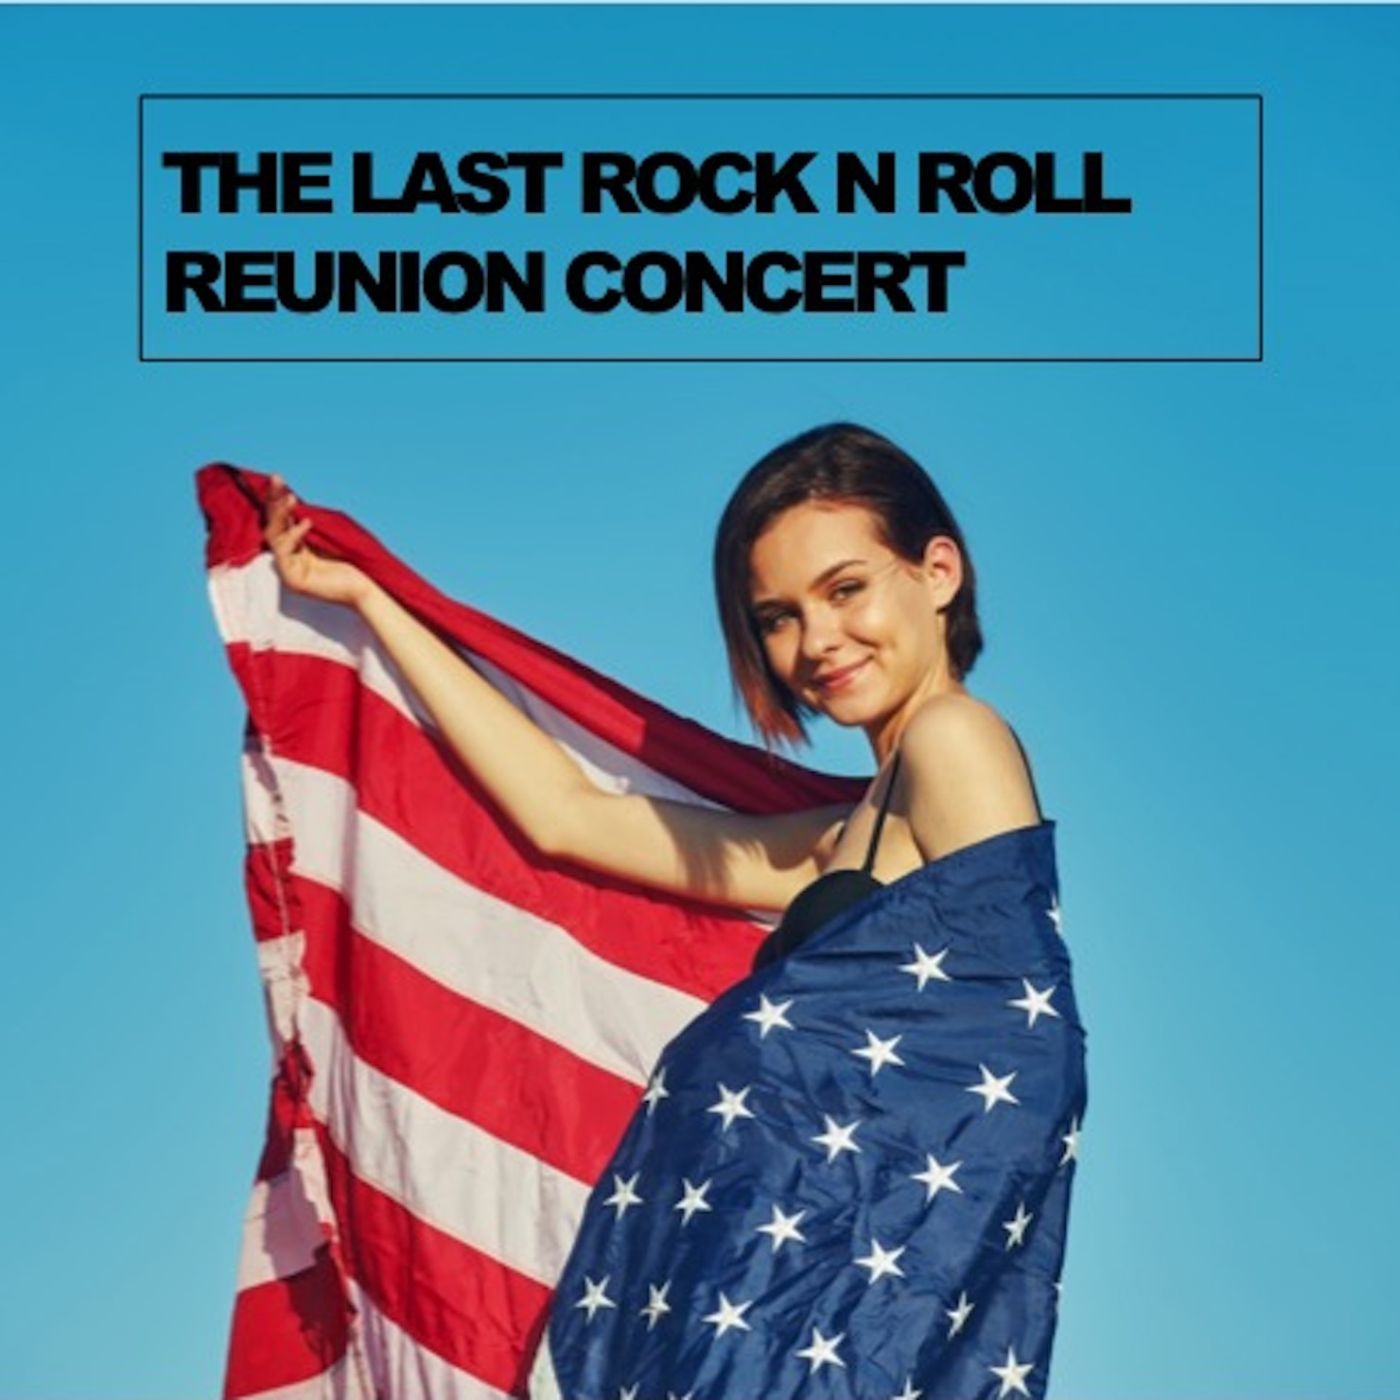 The Last Rock n Roll Reunion Concert